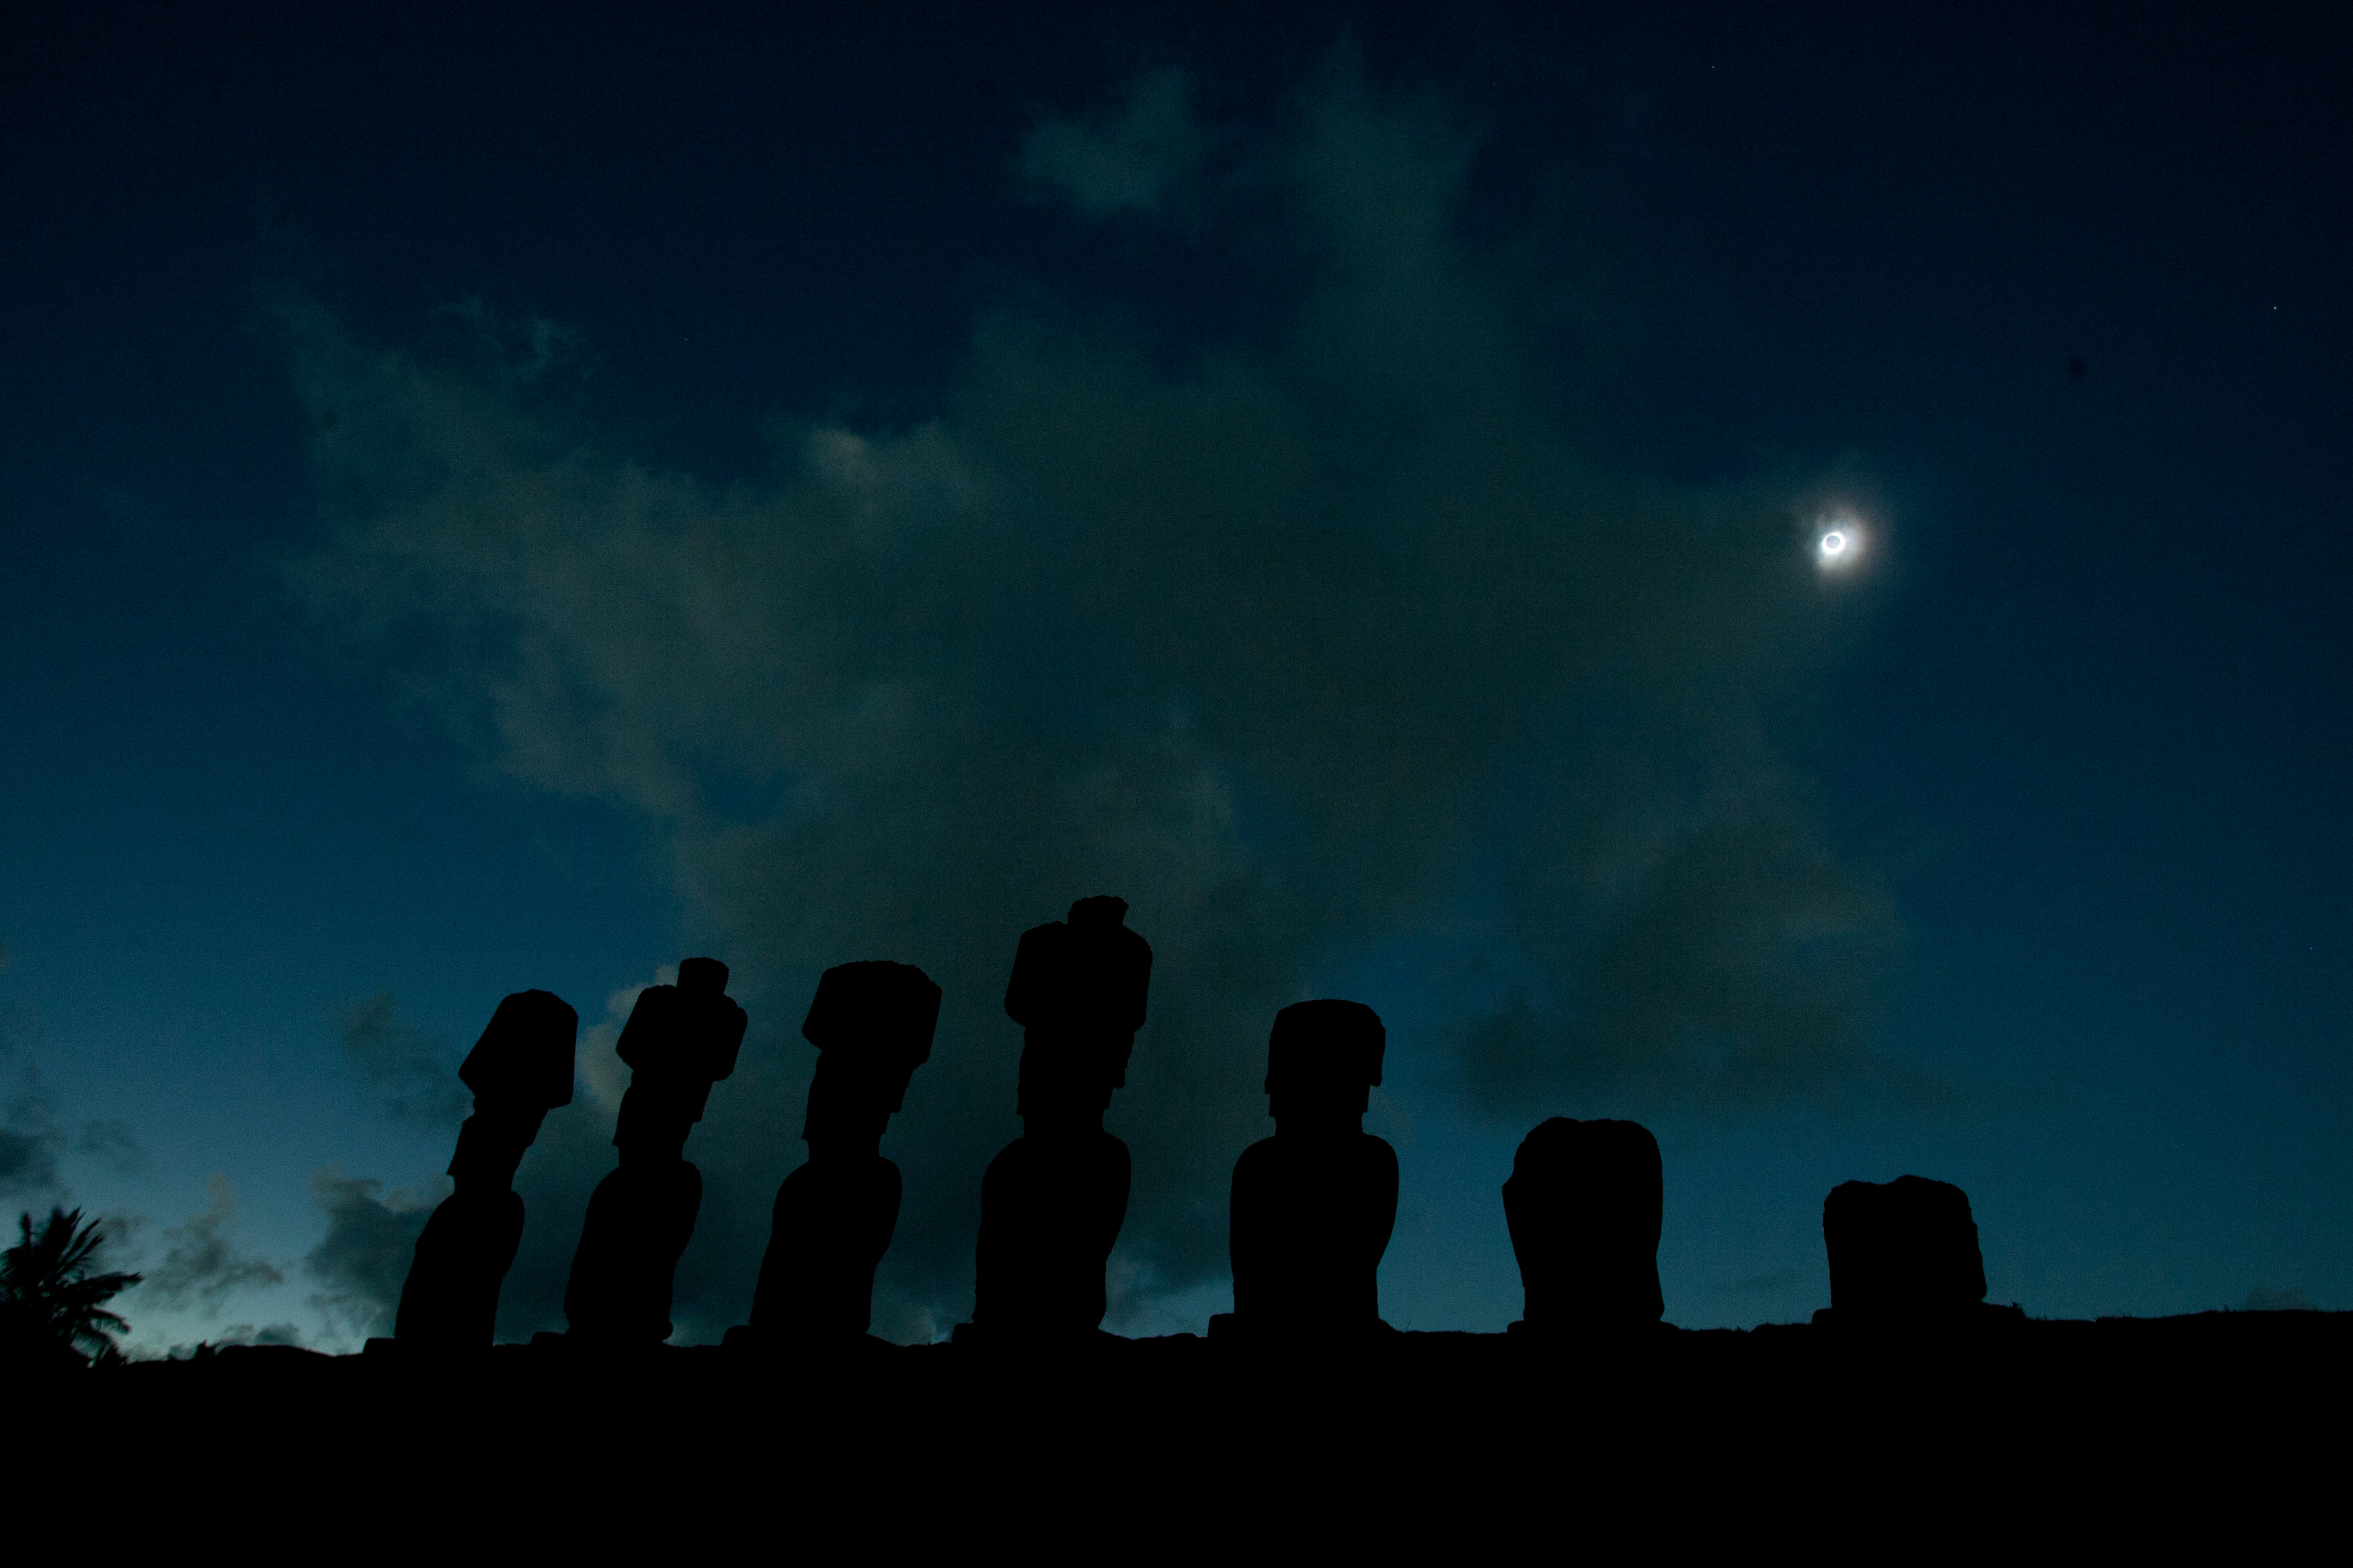 Stone statues known as Moais are pictured during the total solar eclipse in Easter Island, Chile, some 4,000 km (2,480 miles) west of the Chilean coast, Sunday, July 11, 2010. (AP Photo/Patricio Munoz)